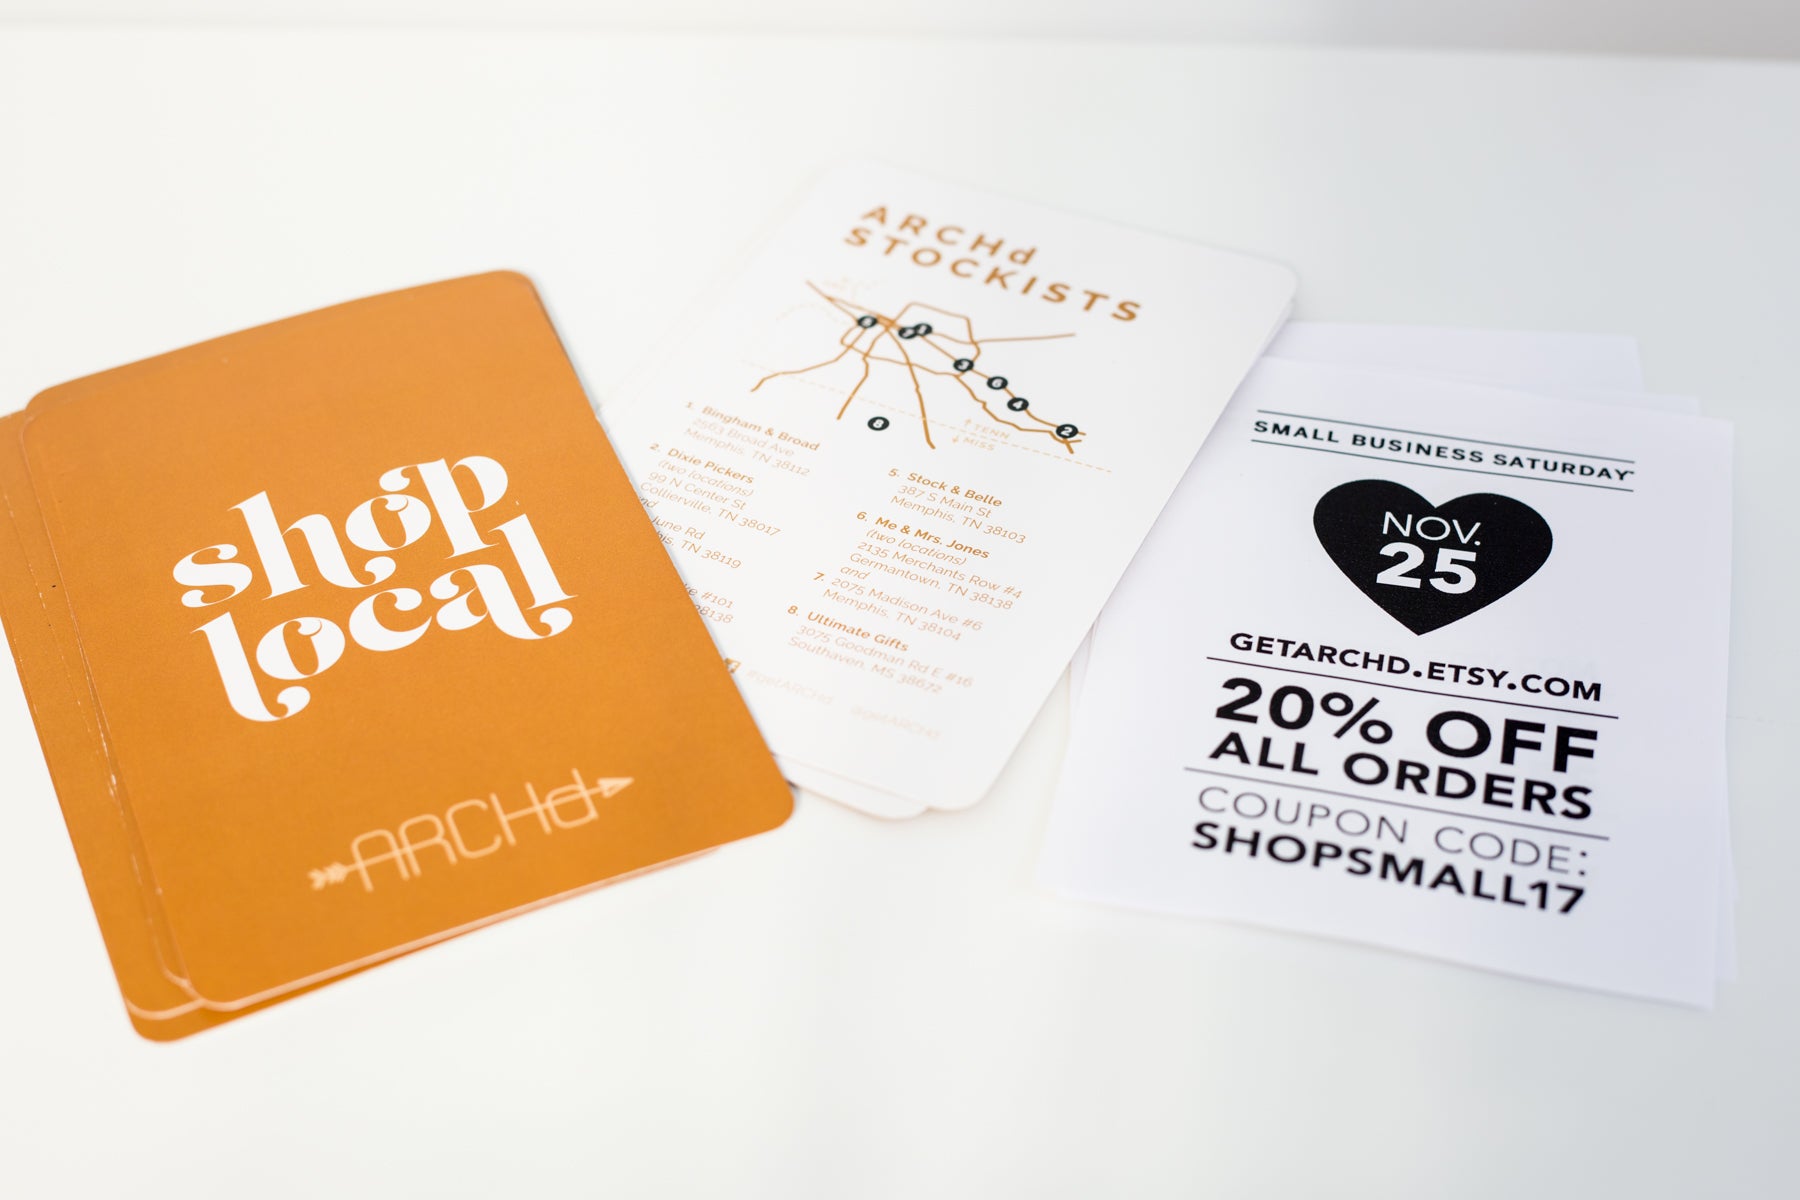 Vendor booth swag flyers design ideas where to shop local sign coupon branding ARCHd